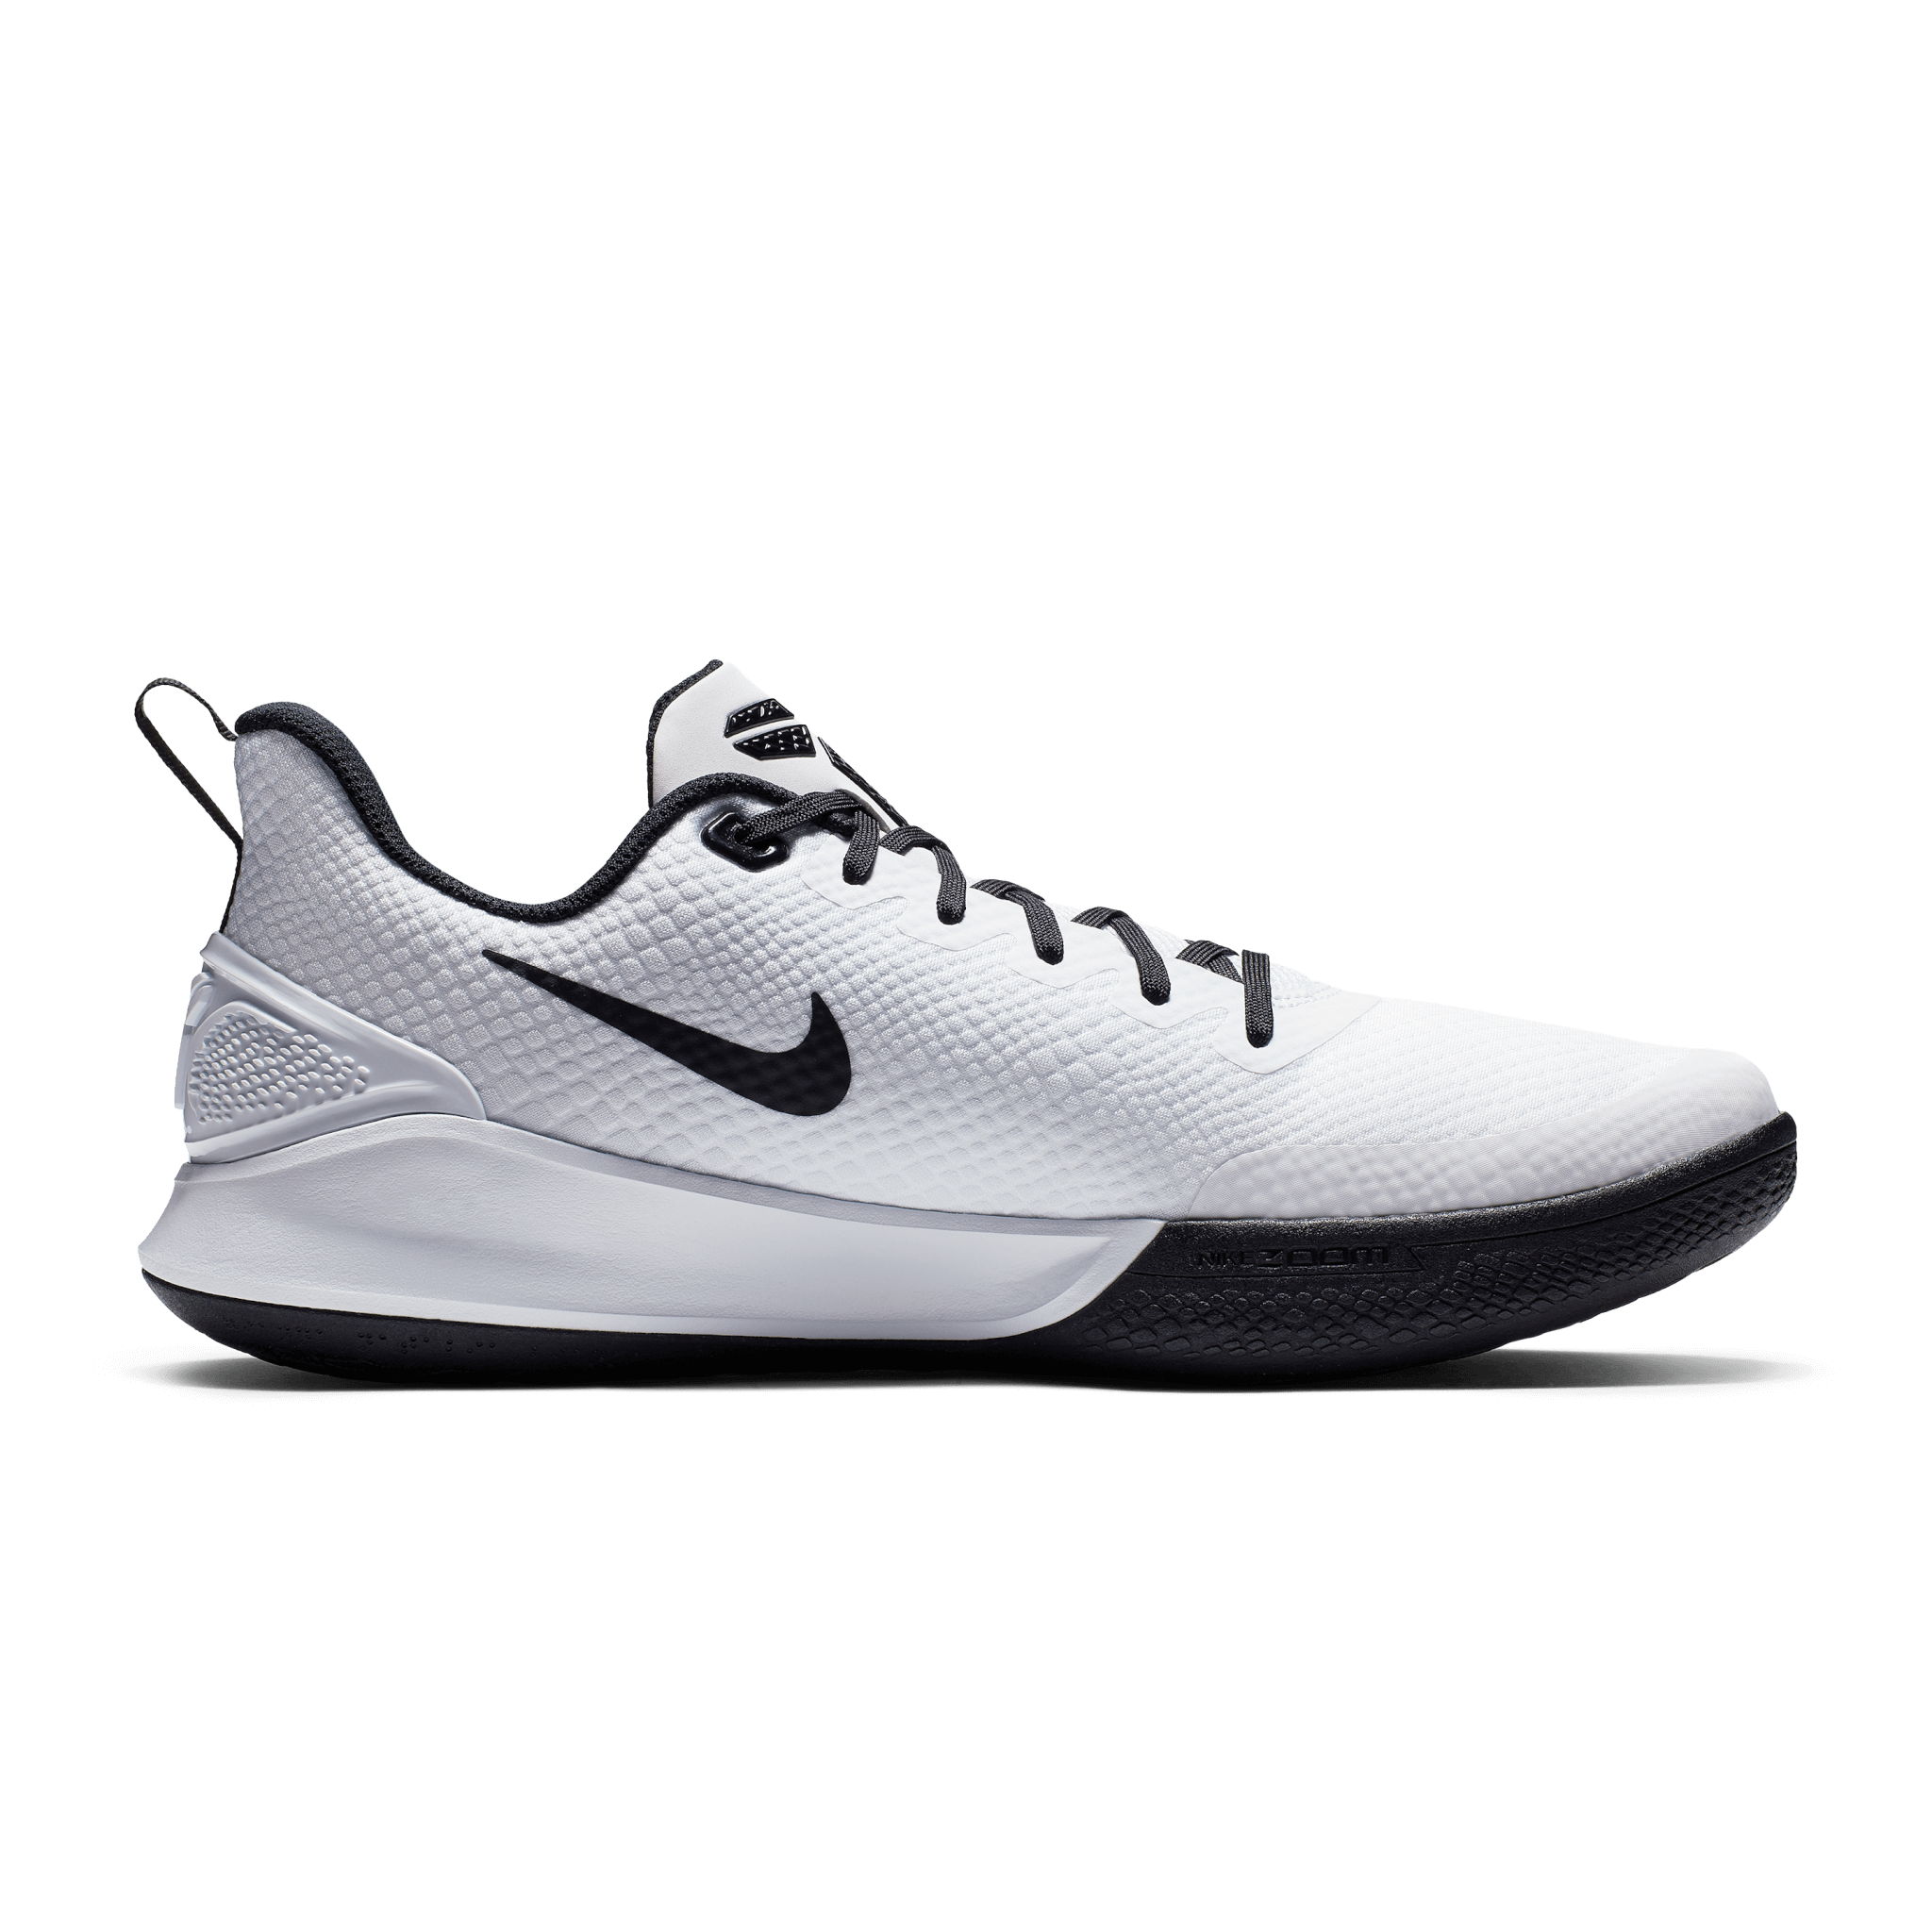 Nike Mamba Focus Performance Review | 2 Sneaker Expert Opinions